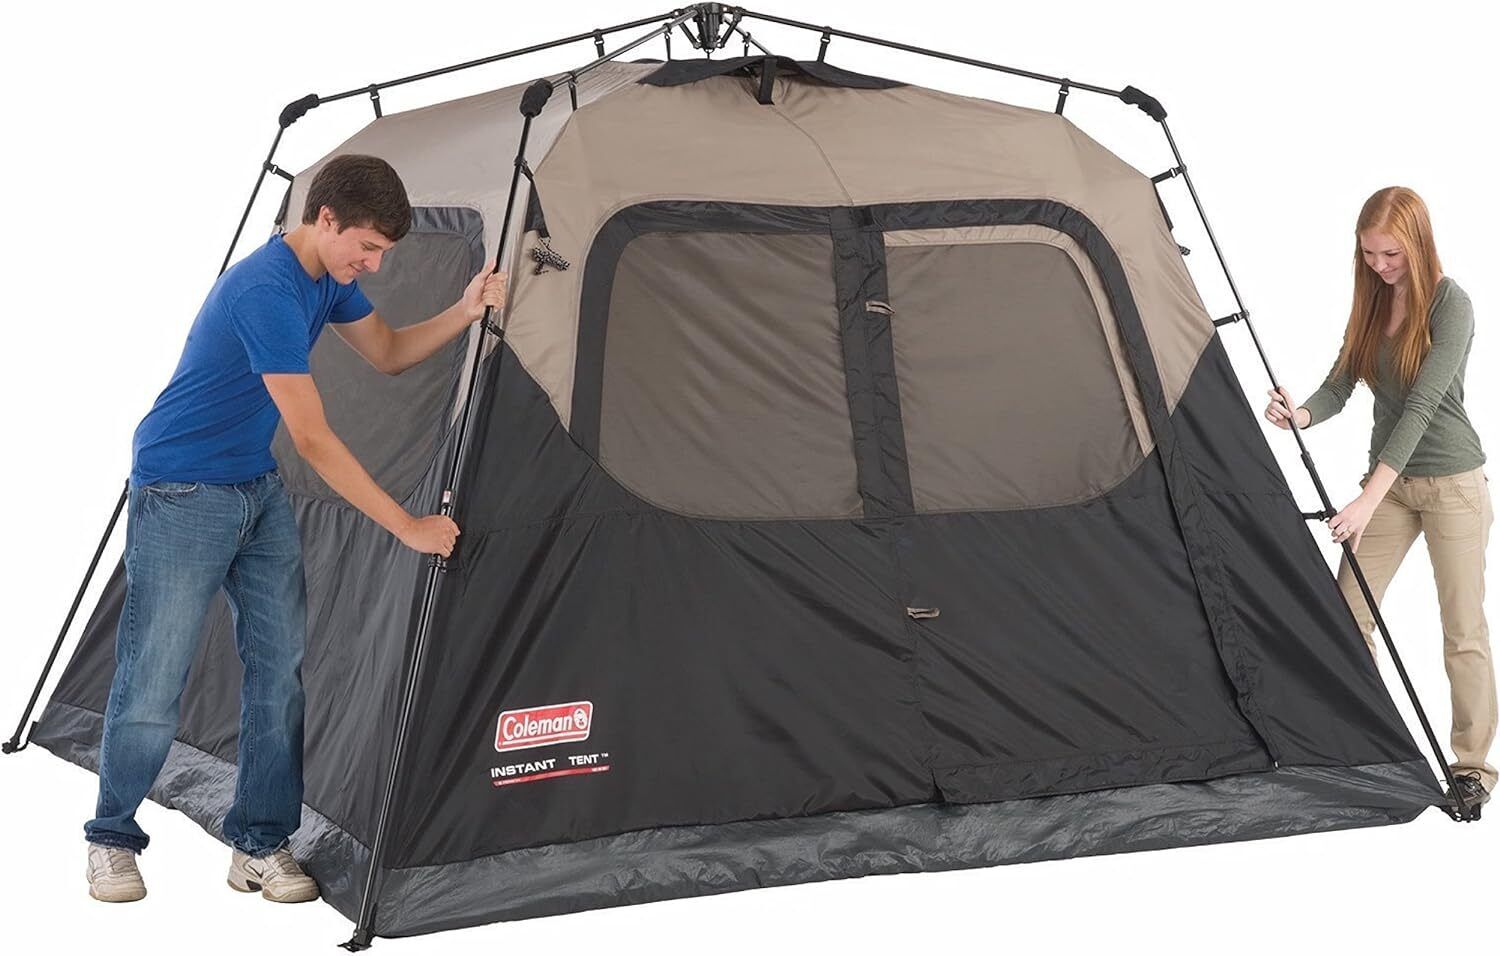 ::Camping Tent Instant Setup Weatherproof Hiking Backpacking Rainfly 6-Person New